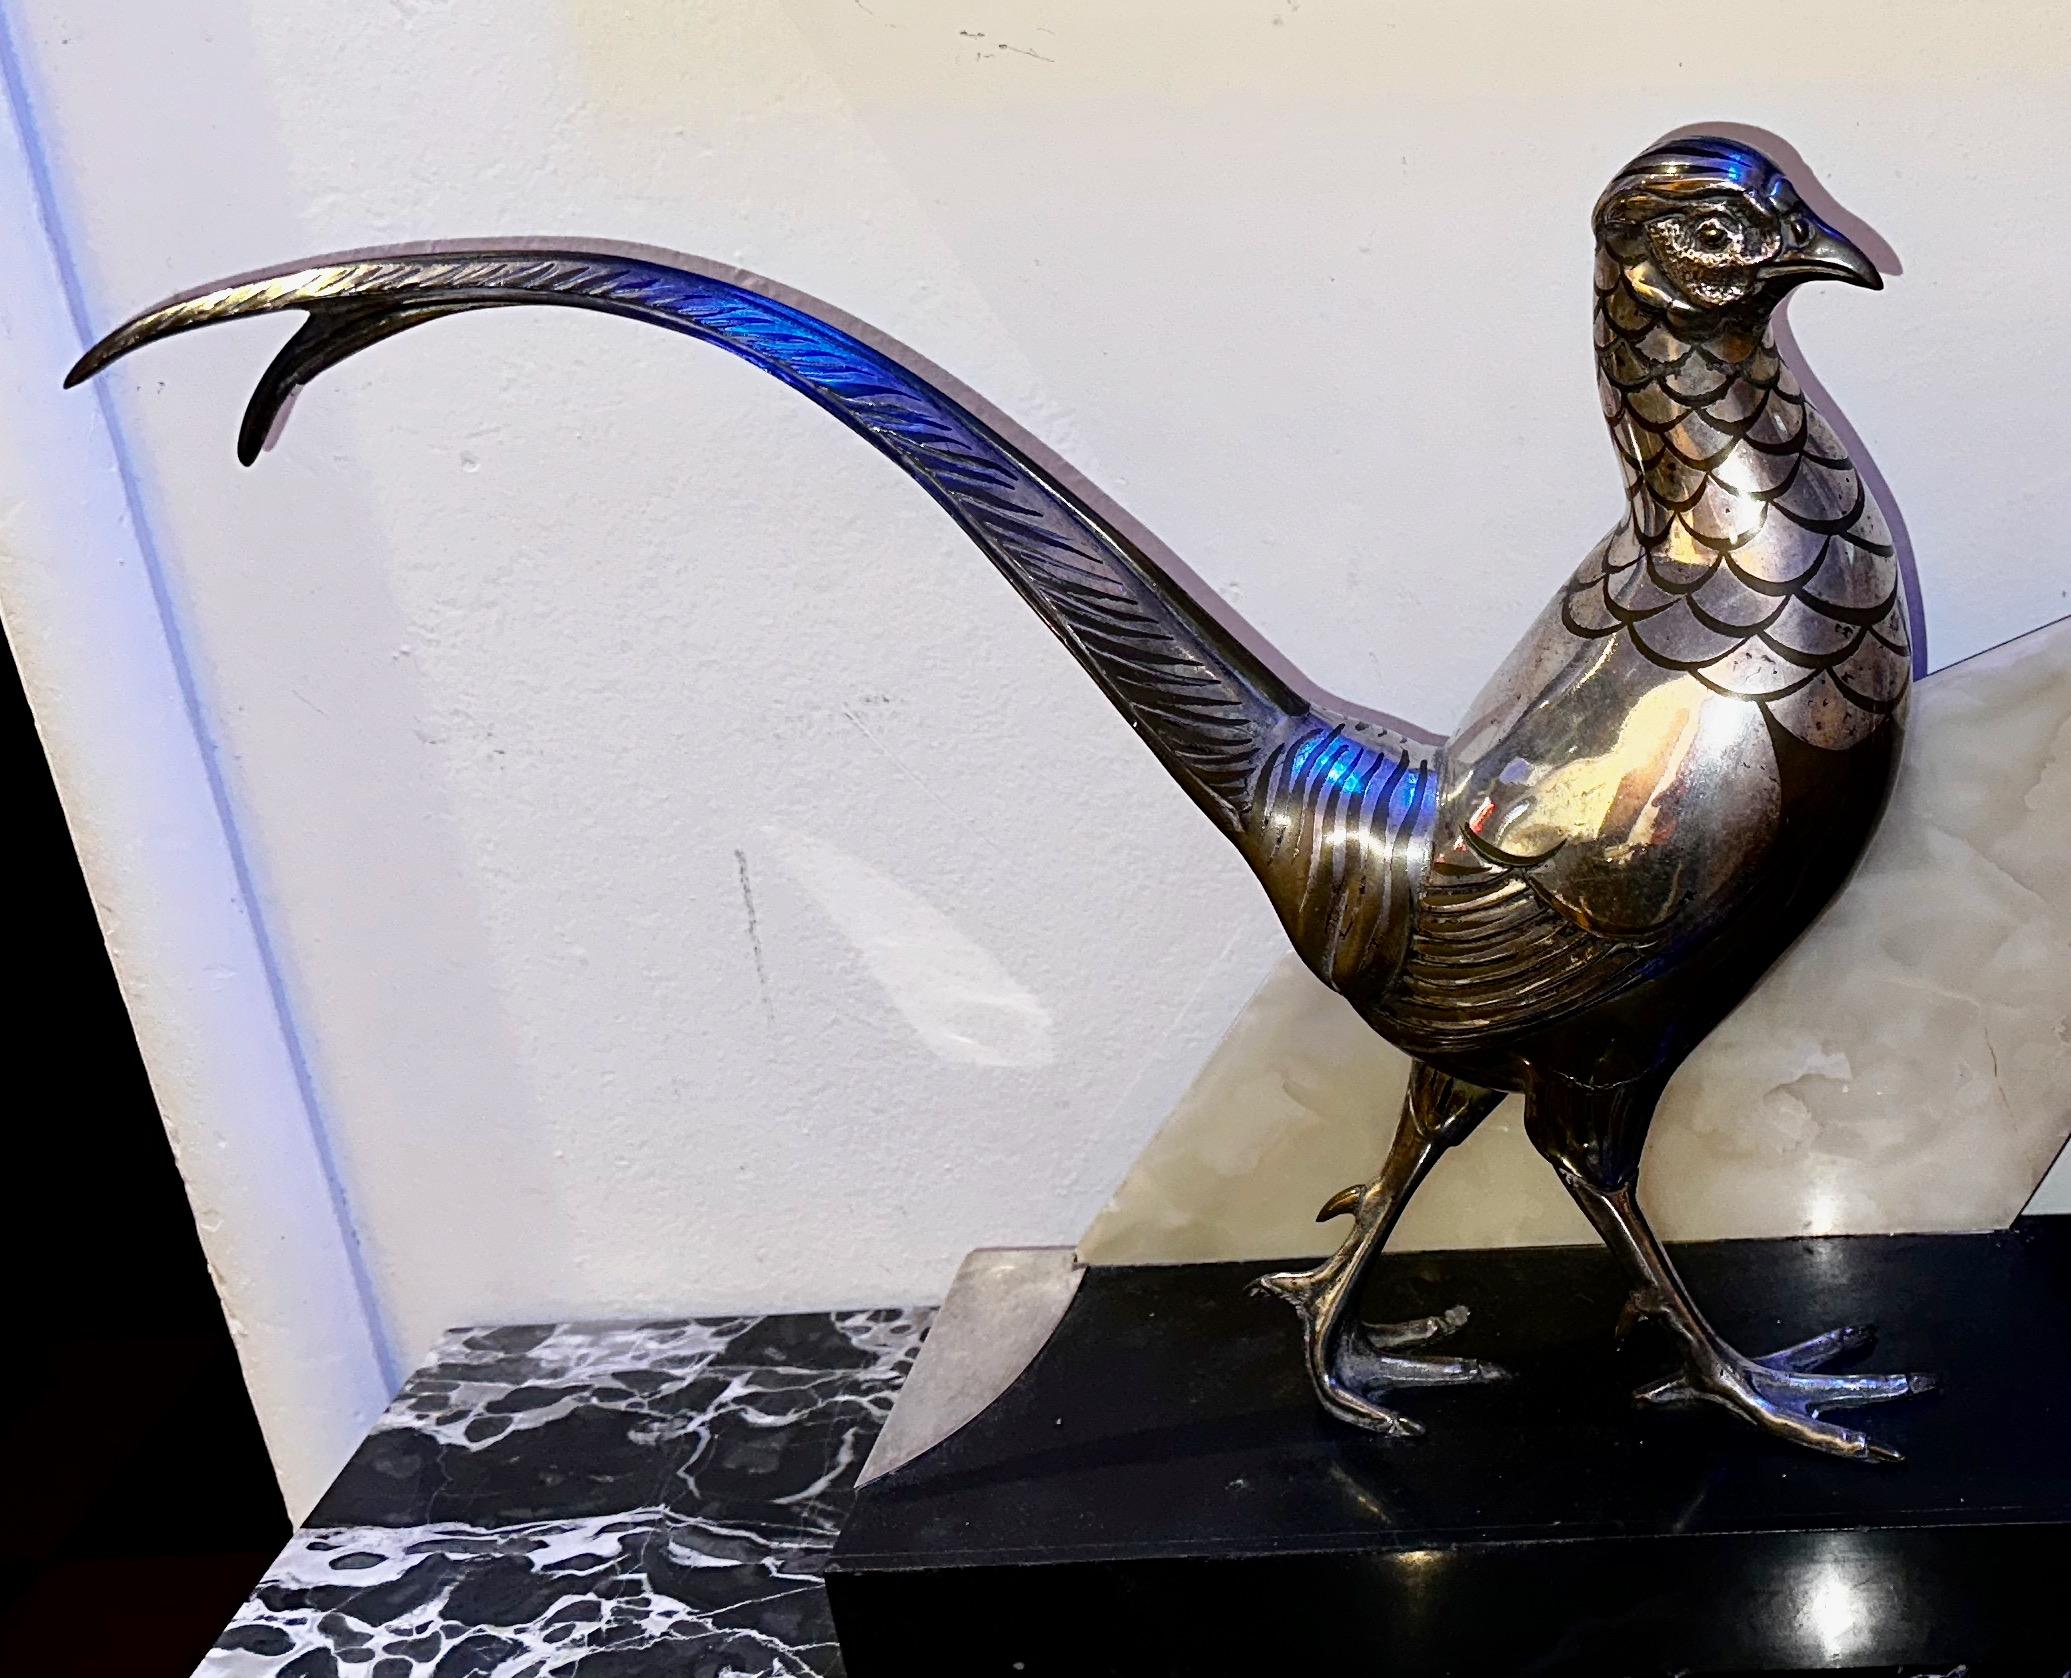 Art Deco Birds Statue by Rochard is a unique treatment of two pheasant birds in contrasting positions. Both figures are mounted on a beautiful base that has been crafted in three colors, marble, quartz, and silver metal. The signature Rochard is